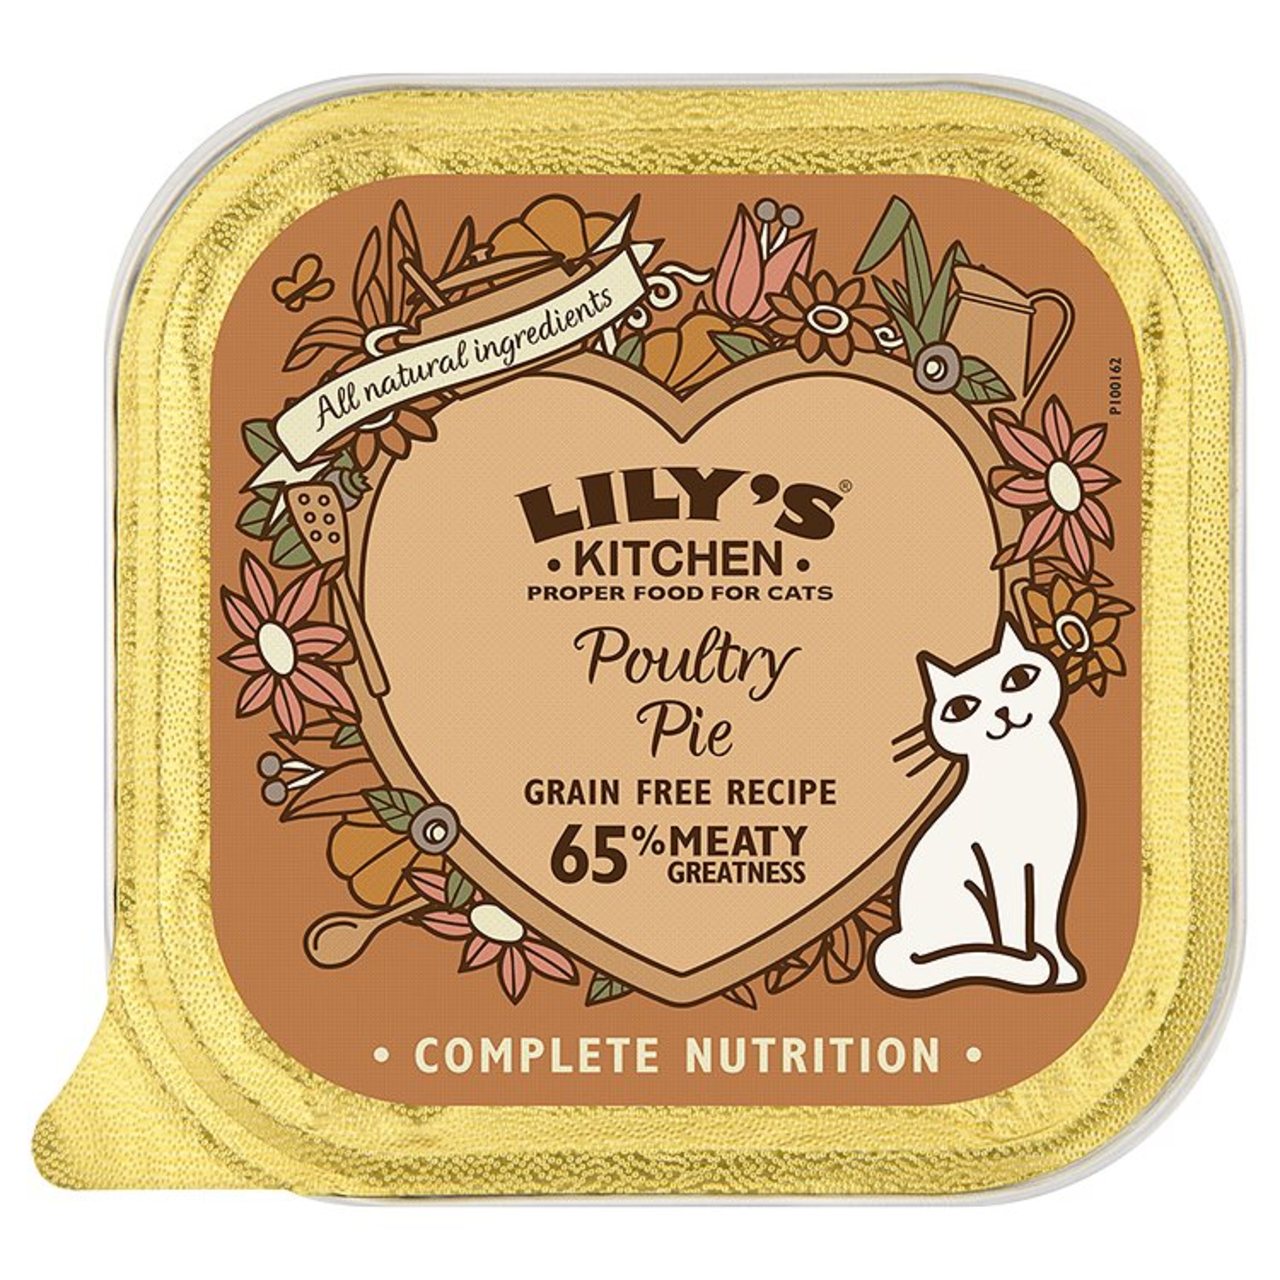 An image of Lily's Kitchen Poultry Pie for Cats